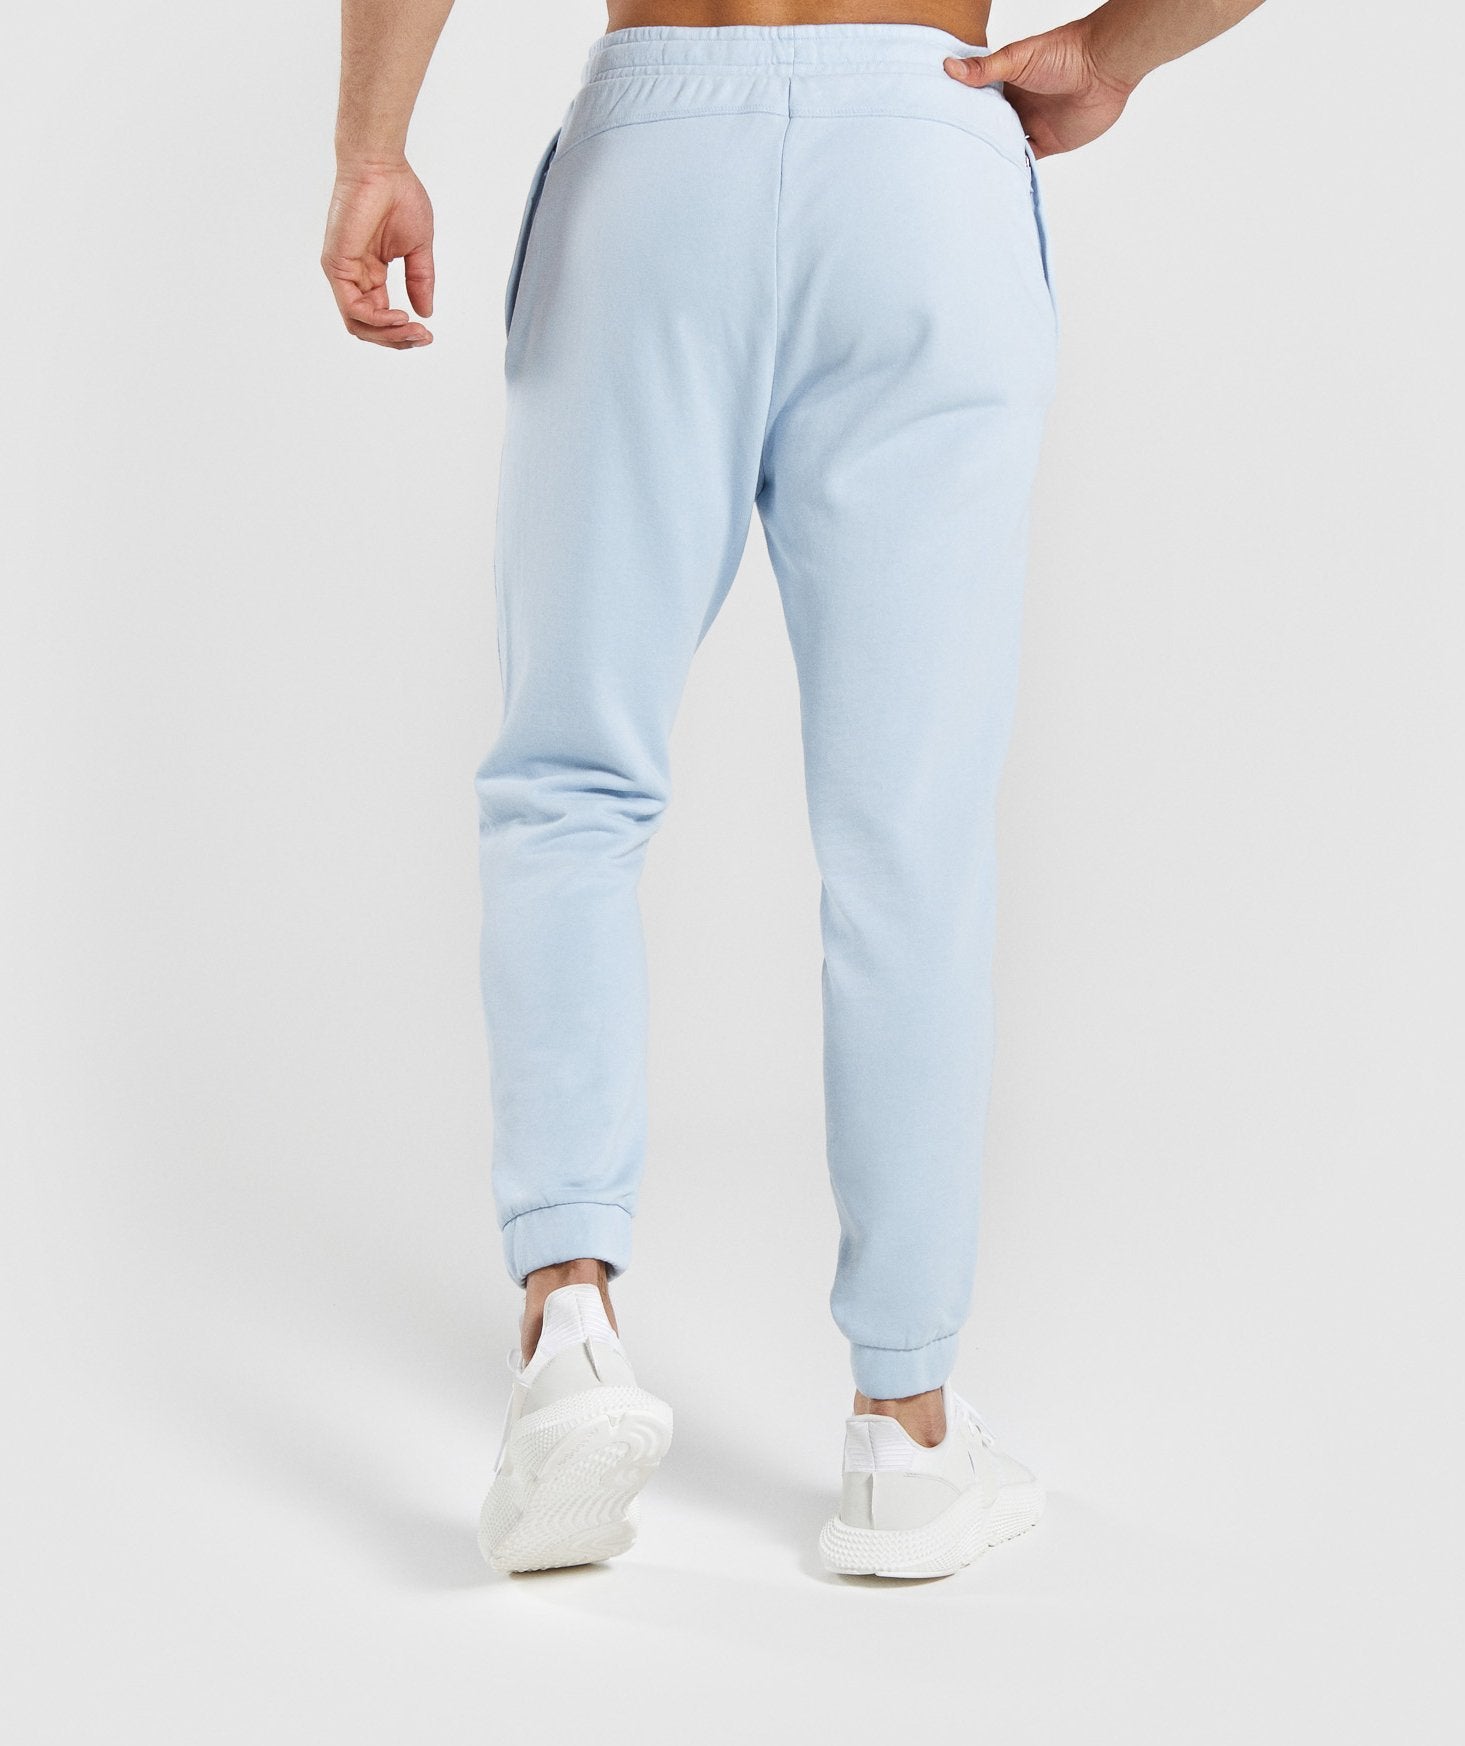 Laundered Joggers in Light Blue - view 2